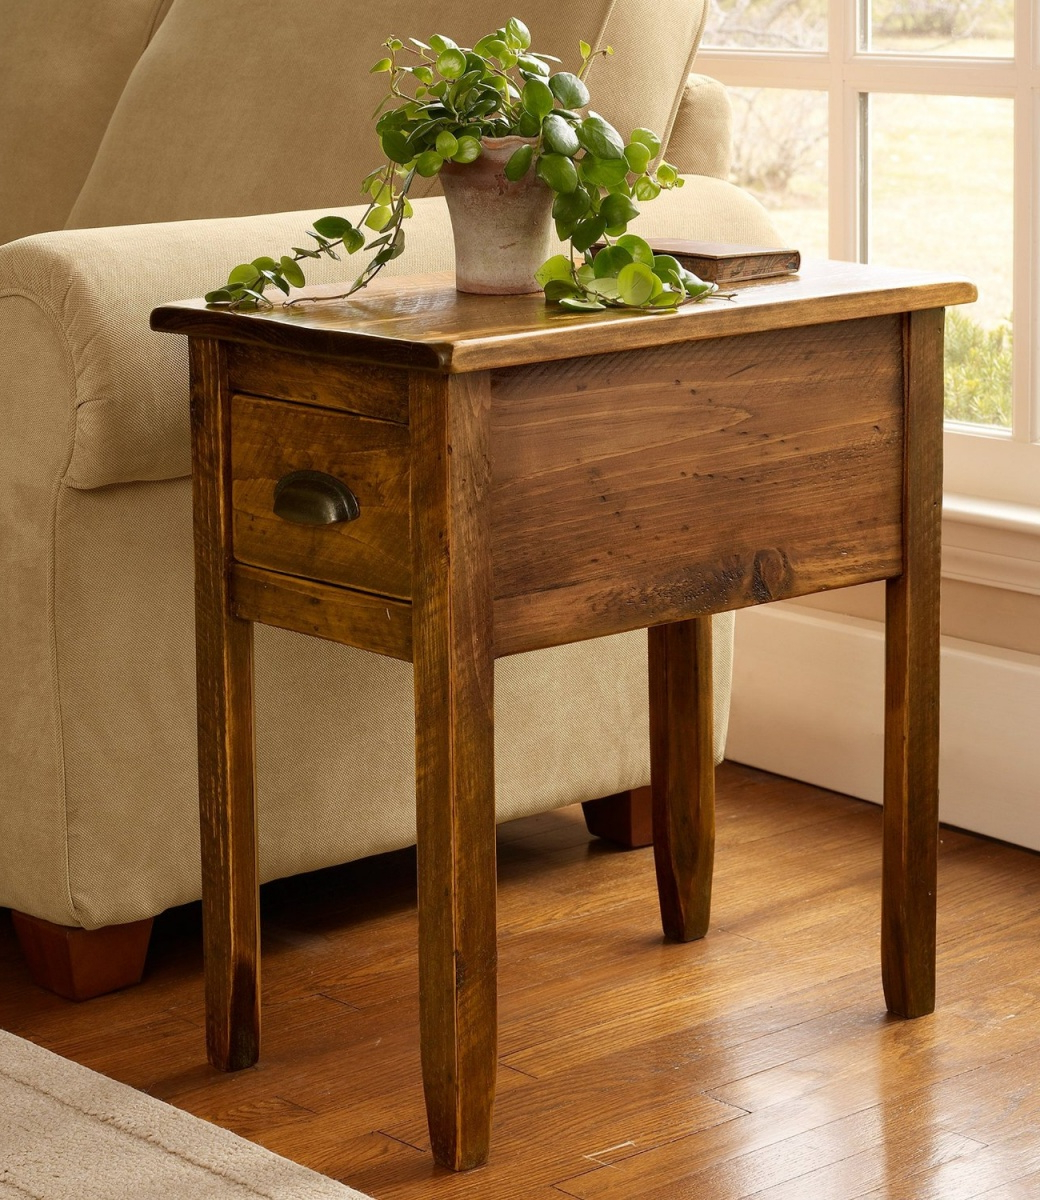 Rustic Wooden Side Tables With Storage For Living Room End Tables 